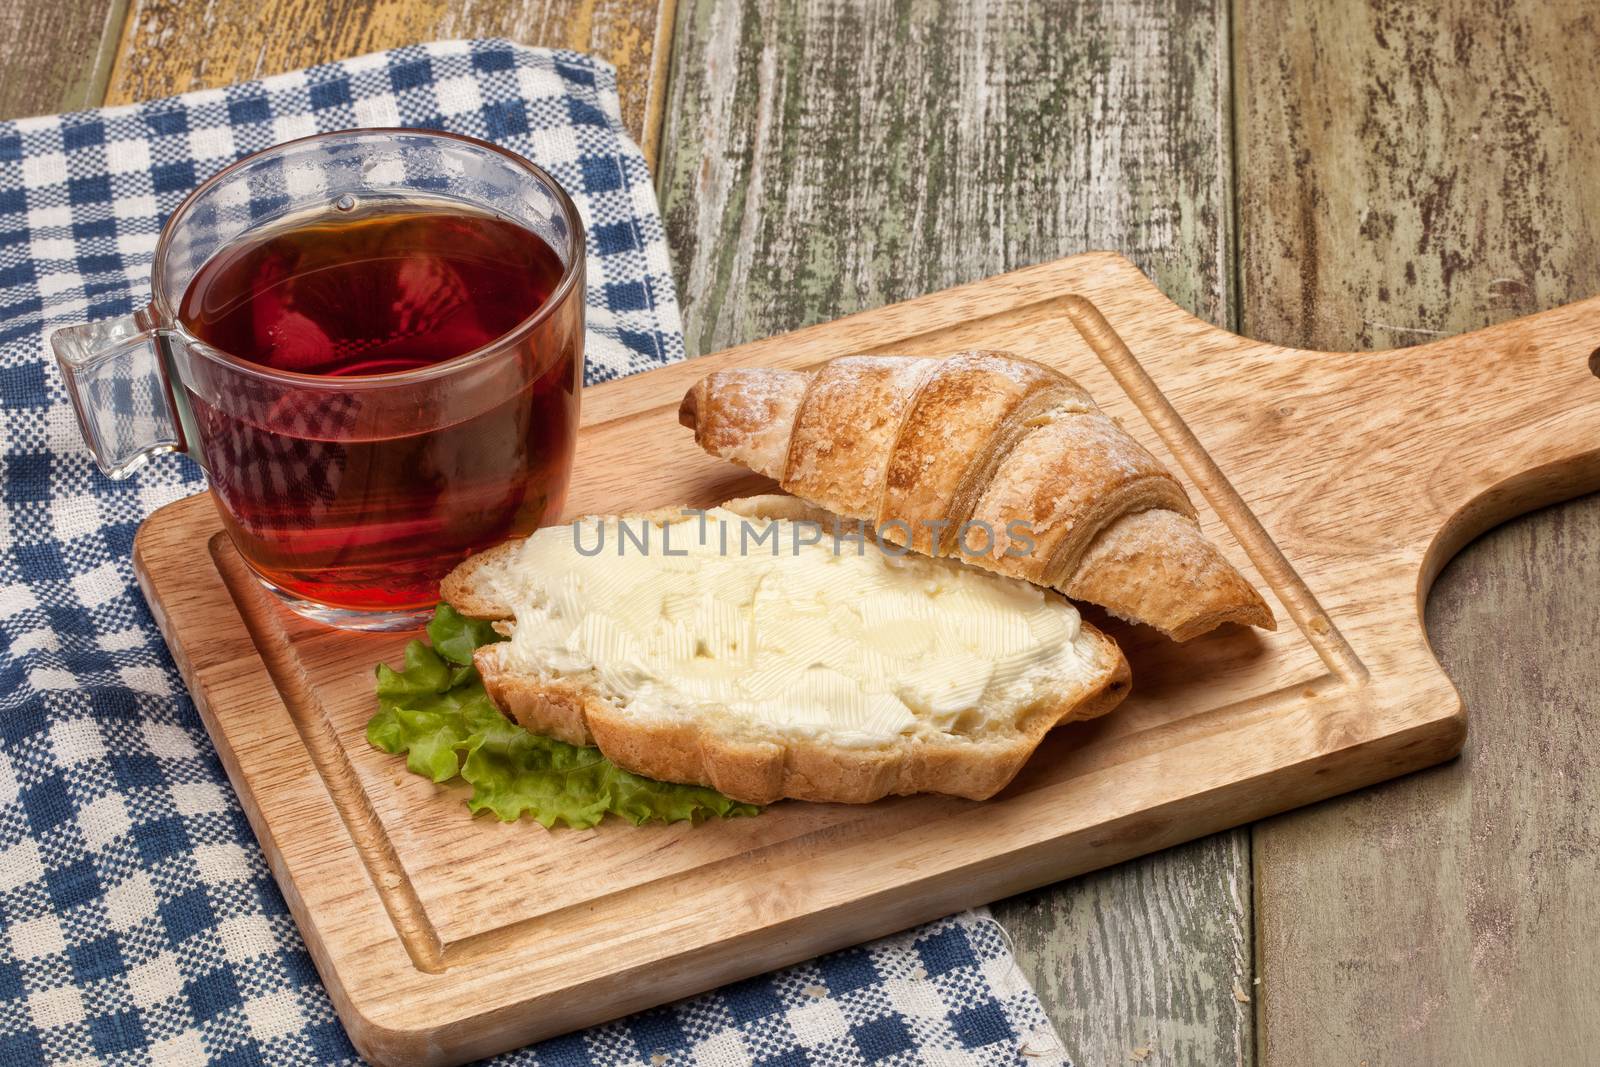 Cup of tea, bread and butter on a wooden table